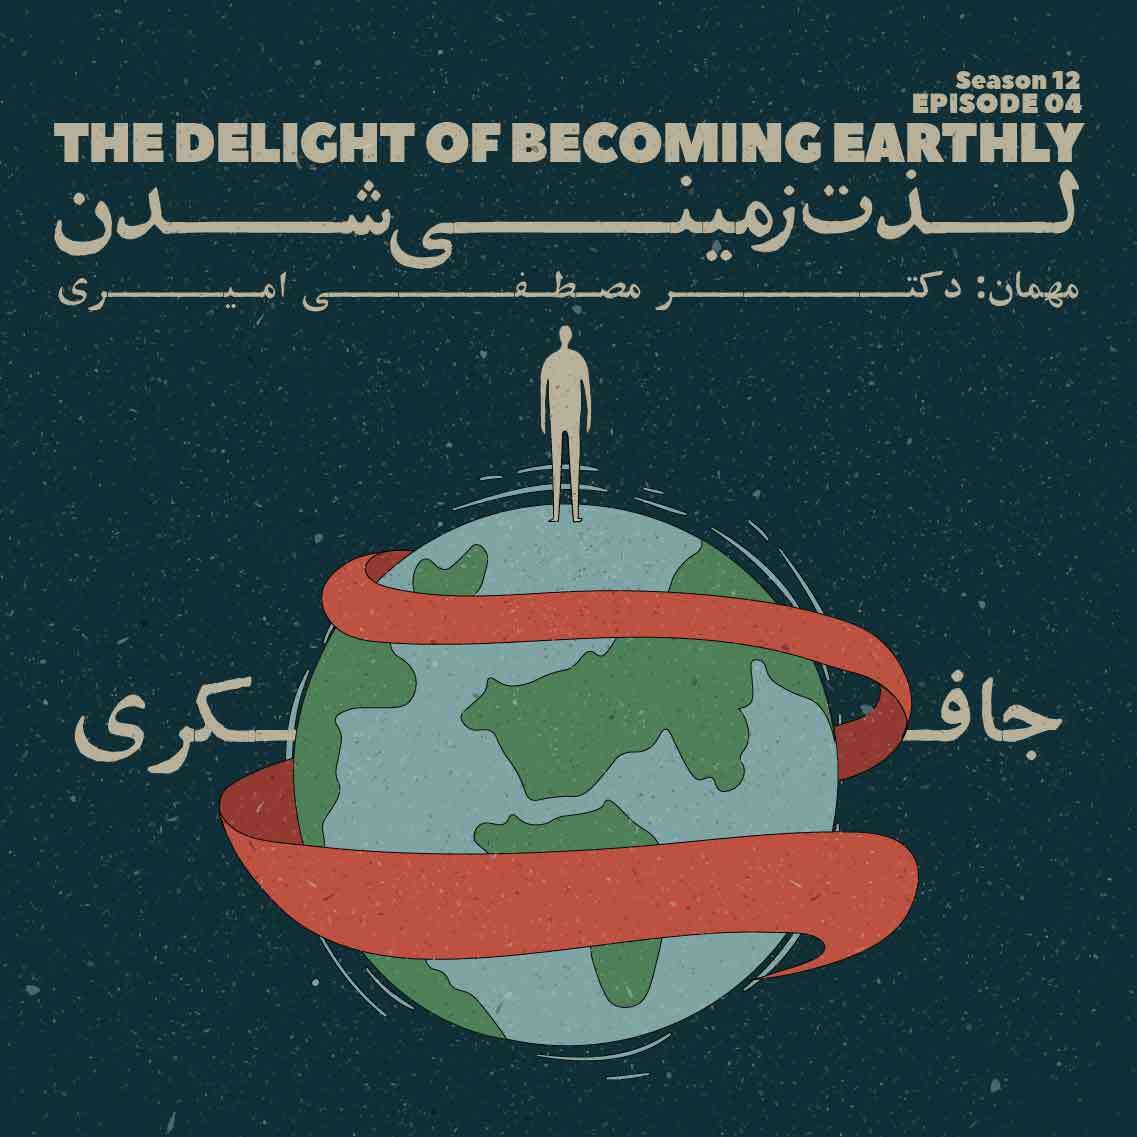 Episode 04 - The delight of becoming earthly (لذت زمینی شدن)